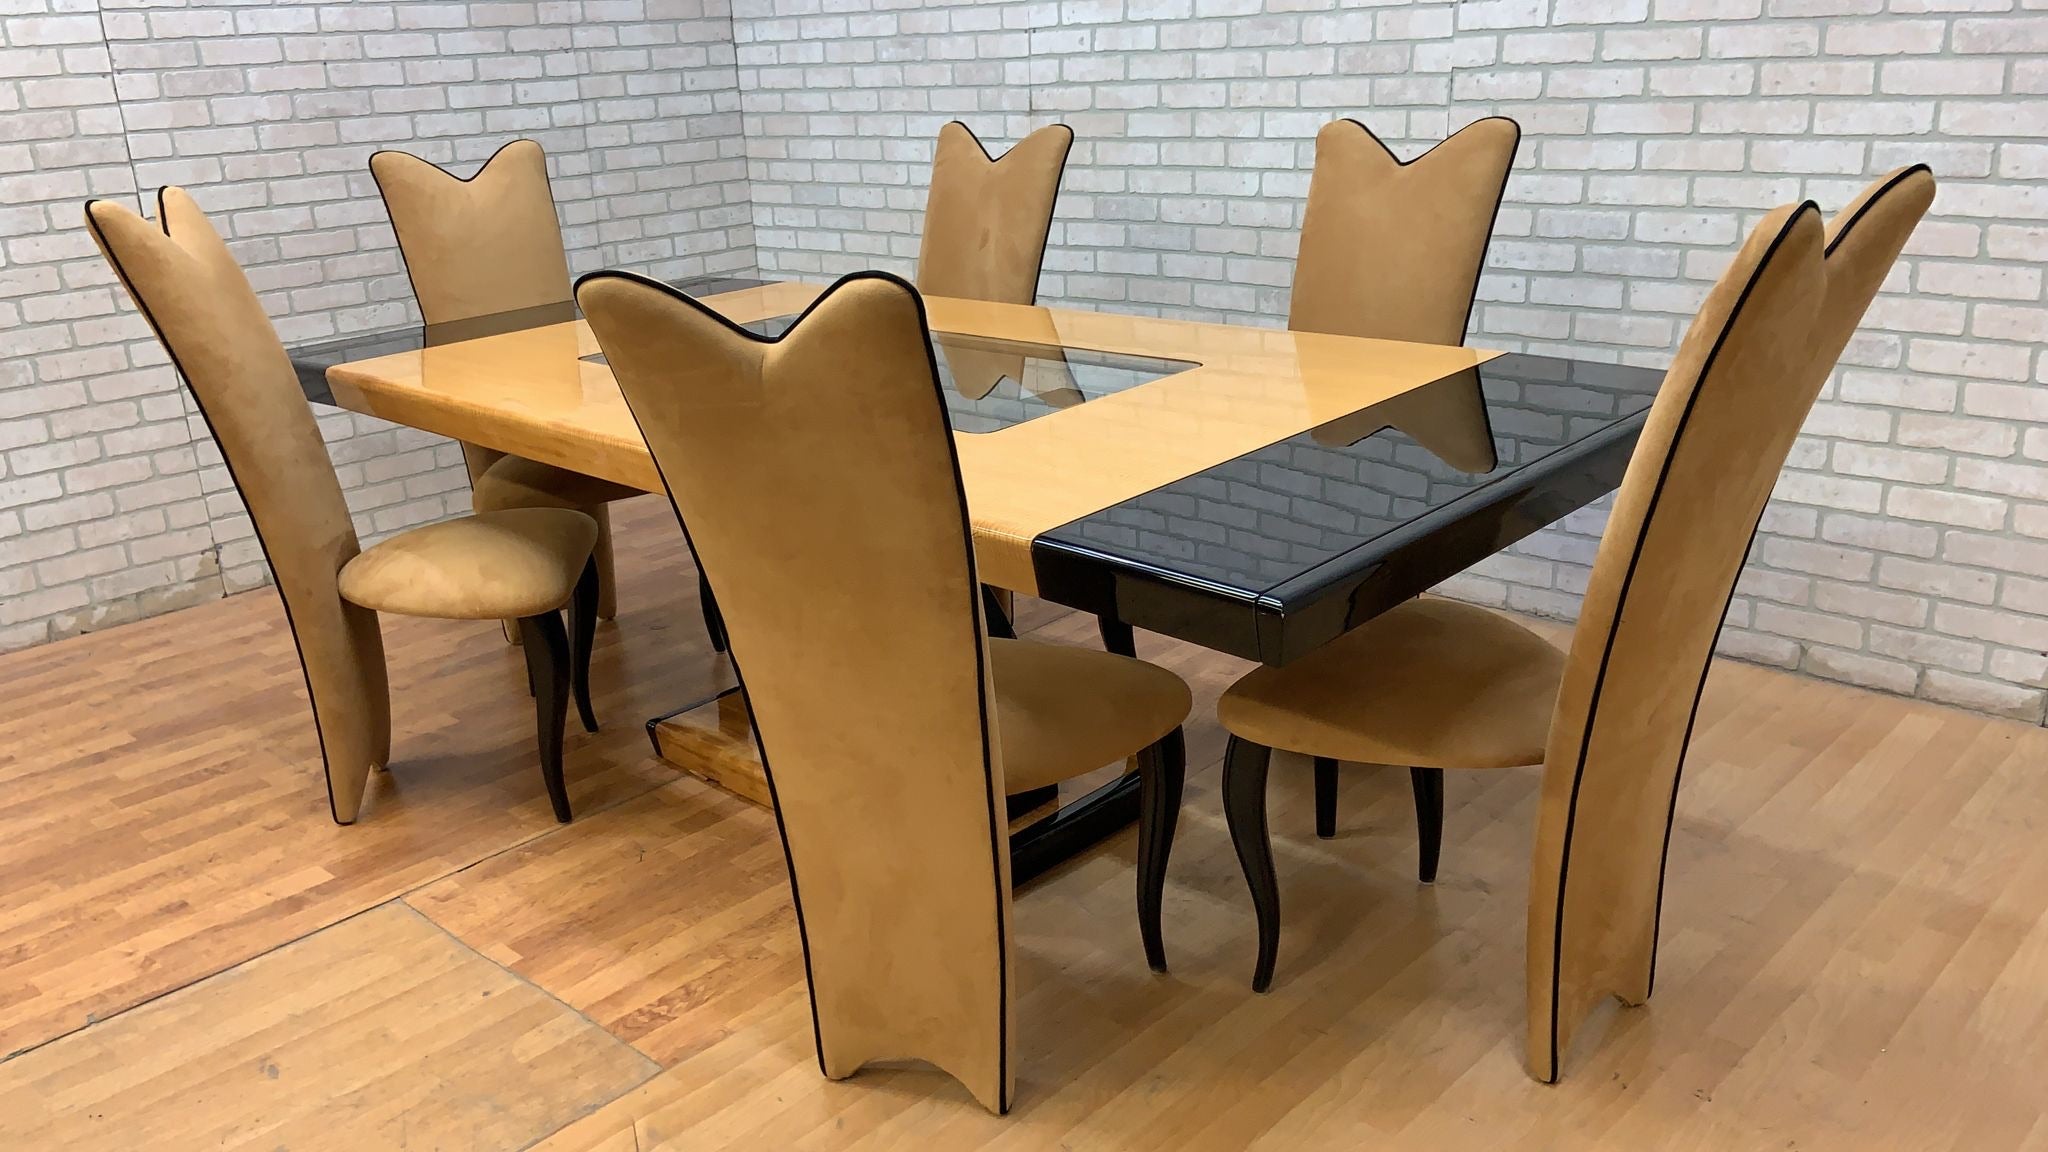 Vintage Italian Art Deco Extending Dining Table with 6 High Back Dining Chairs - 9 Piece Set